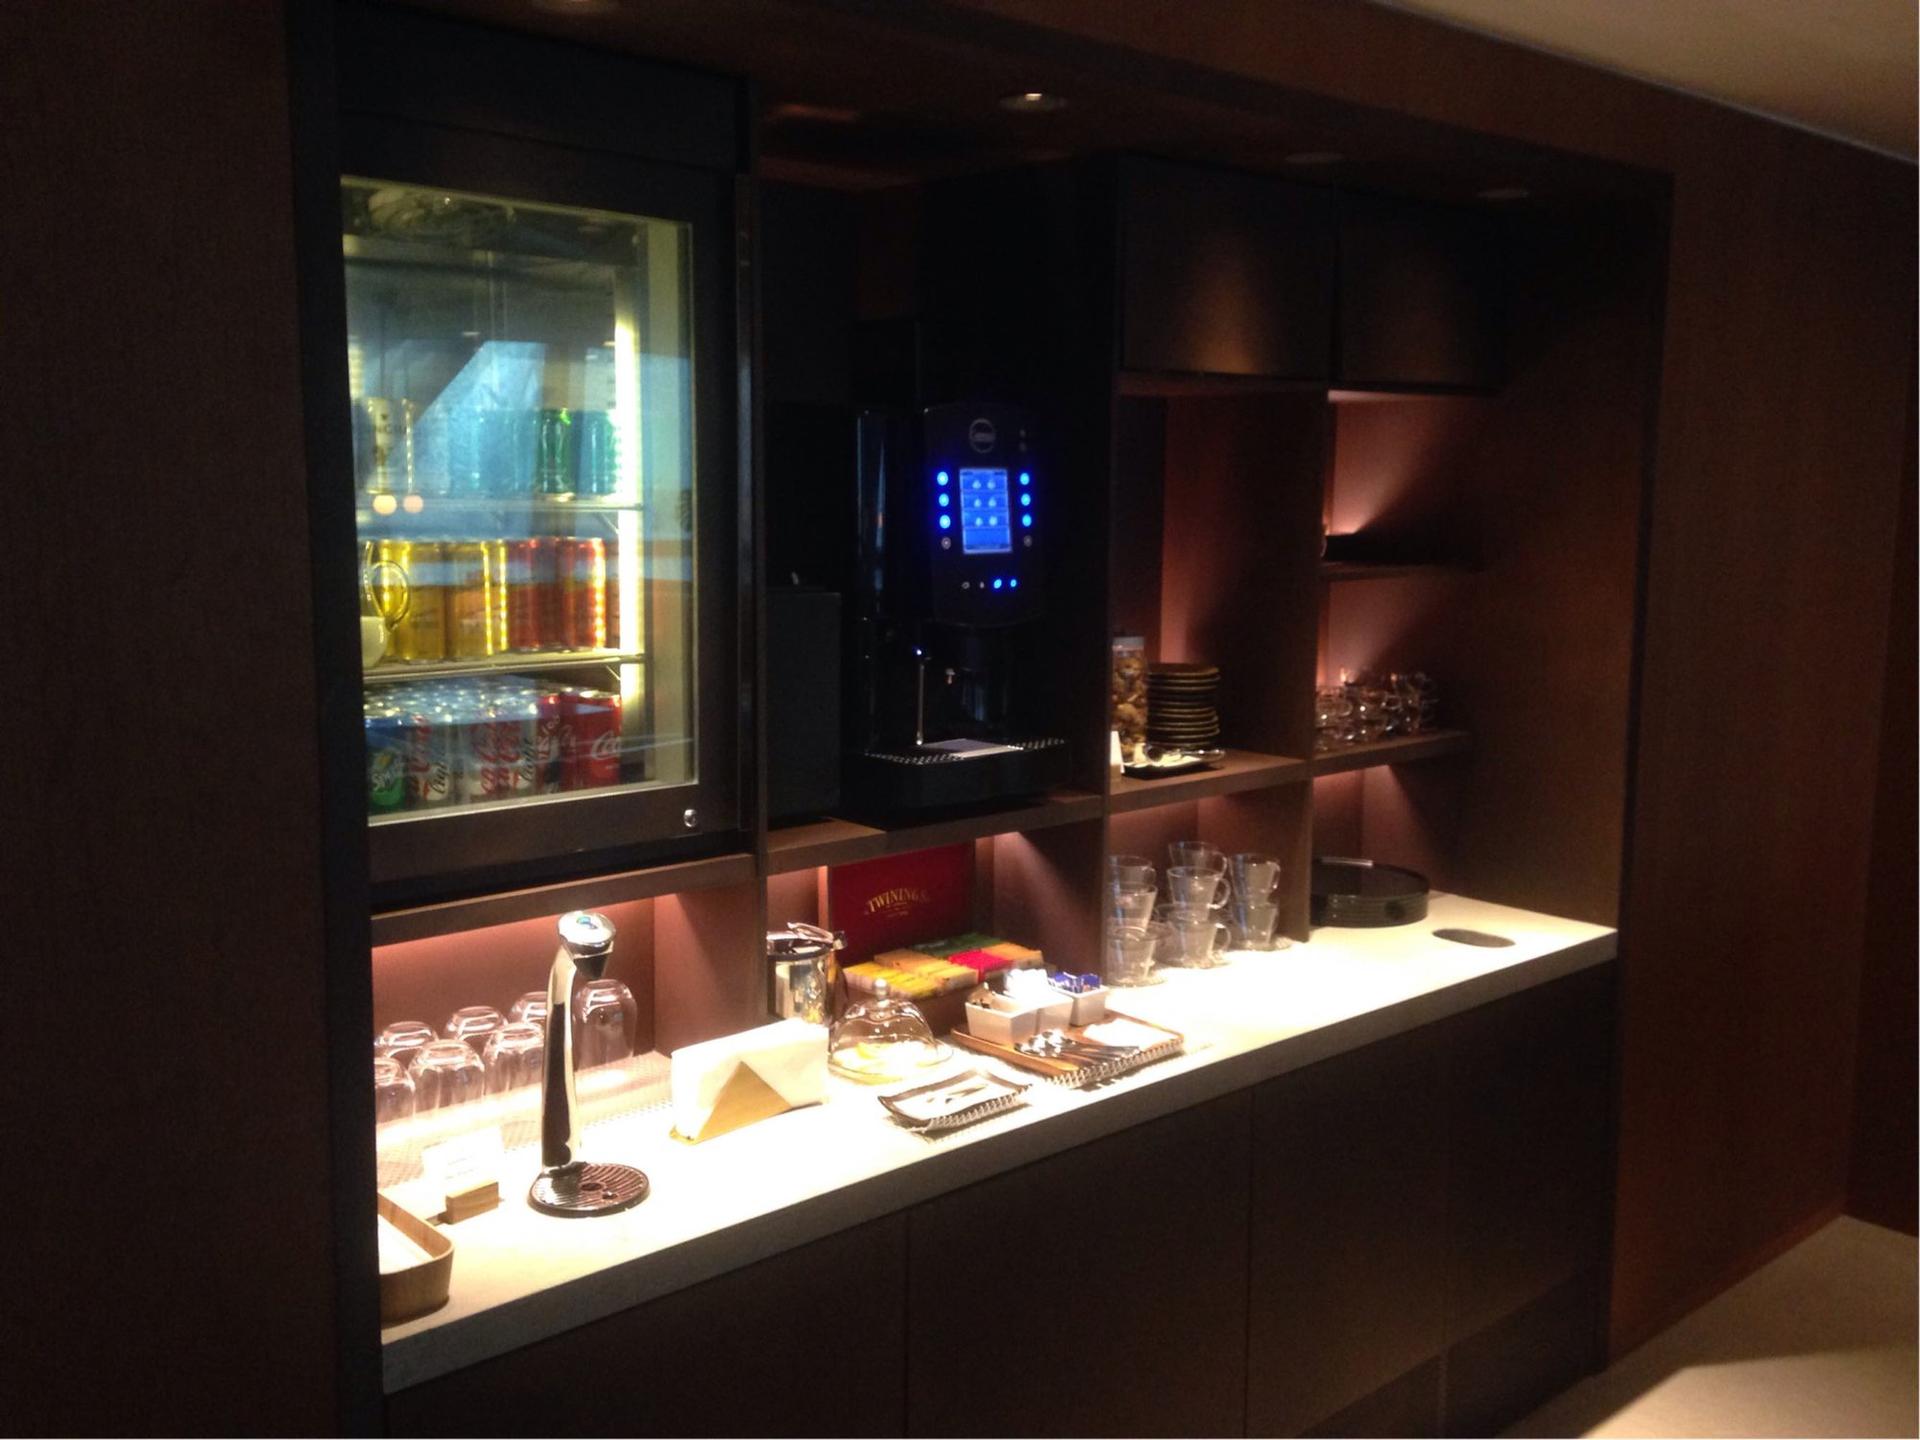 Cathay Pacific First and Business Class Lounge image 34 of 69